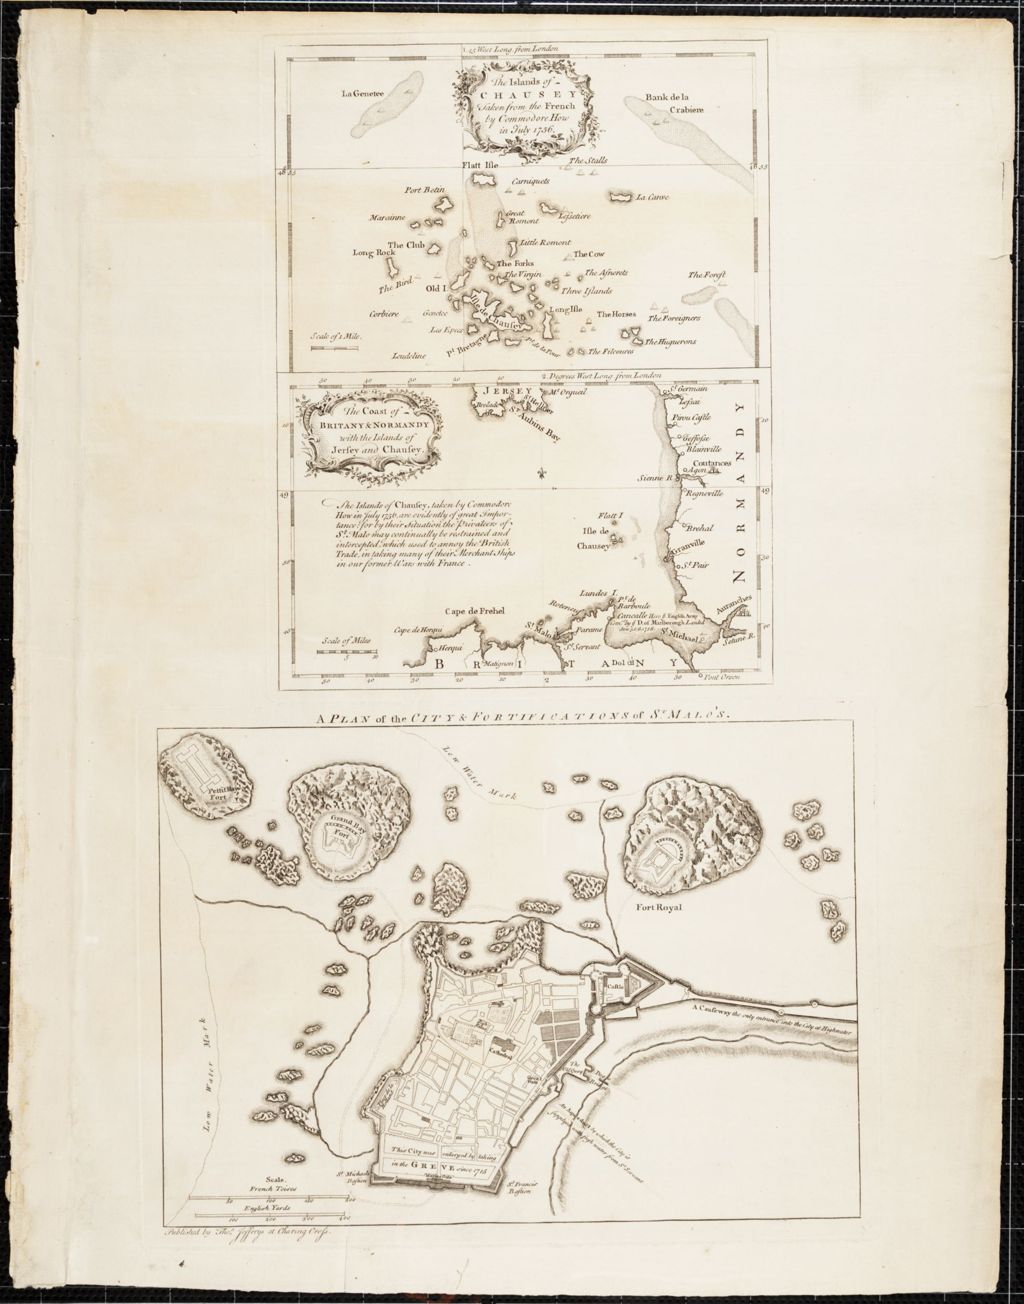 The Islands of Chausey, The coast of Britany & Normandy, St. Malo's (1756)